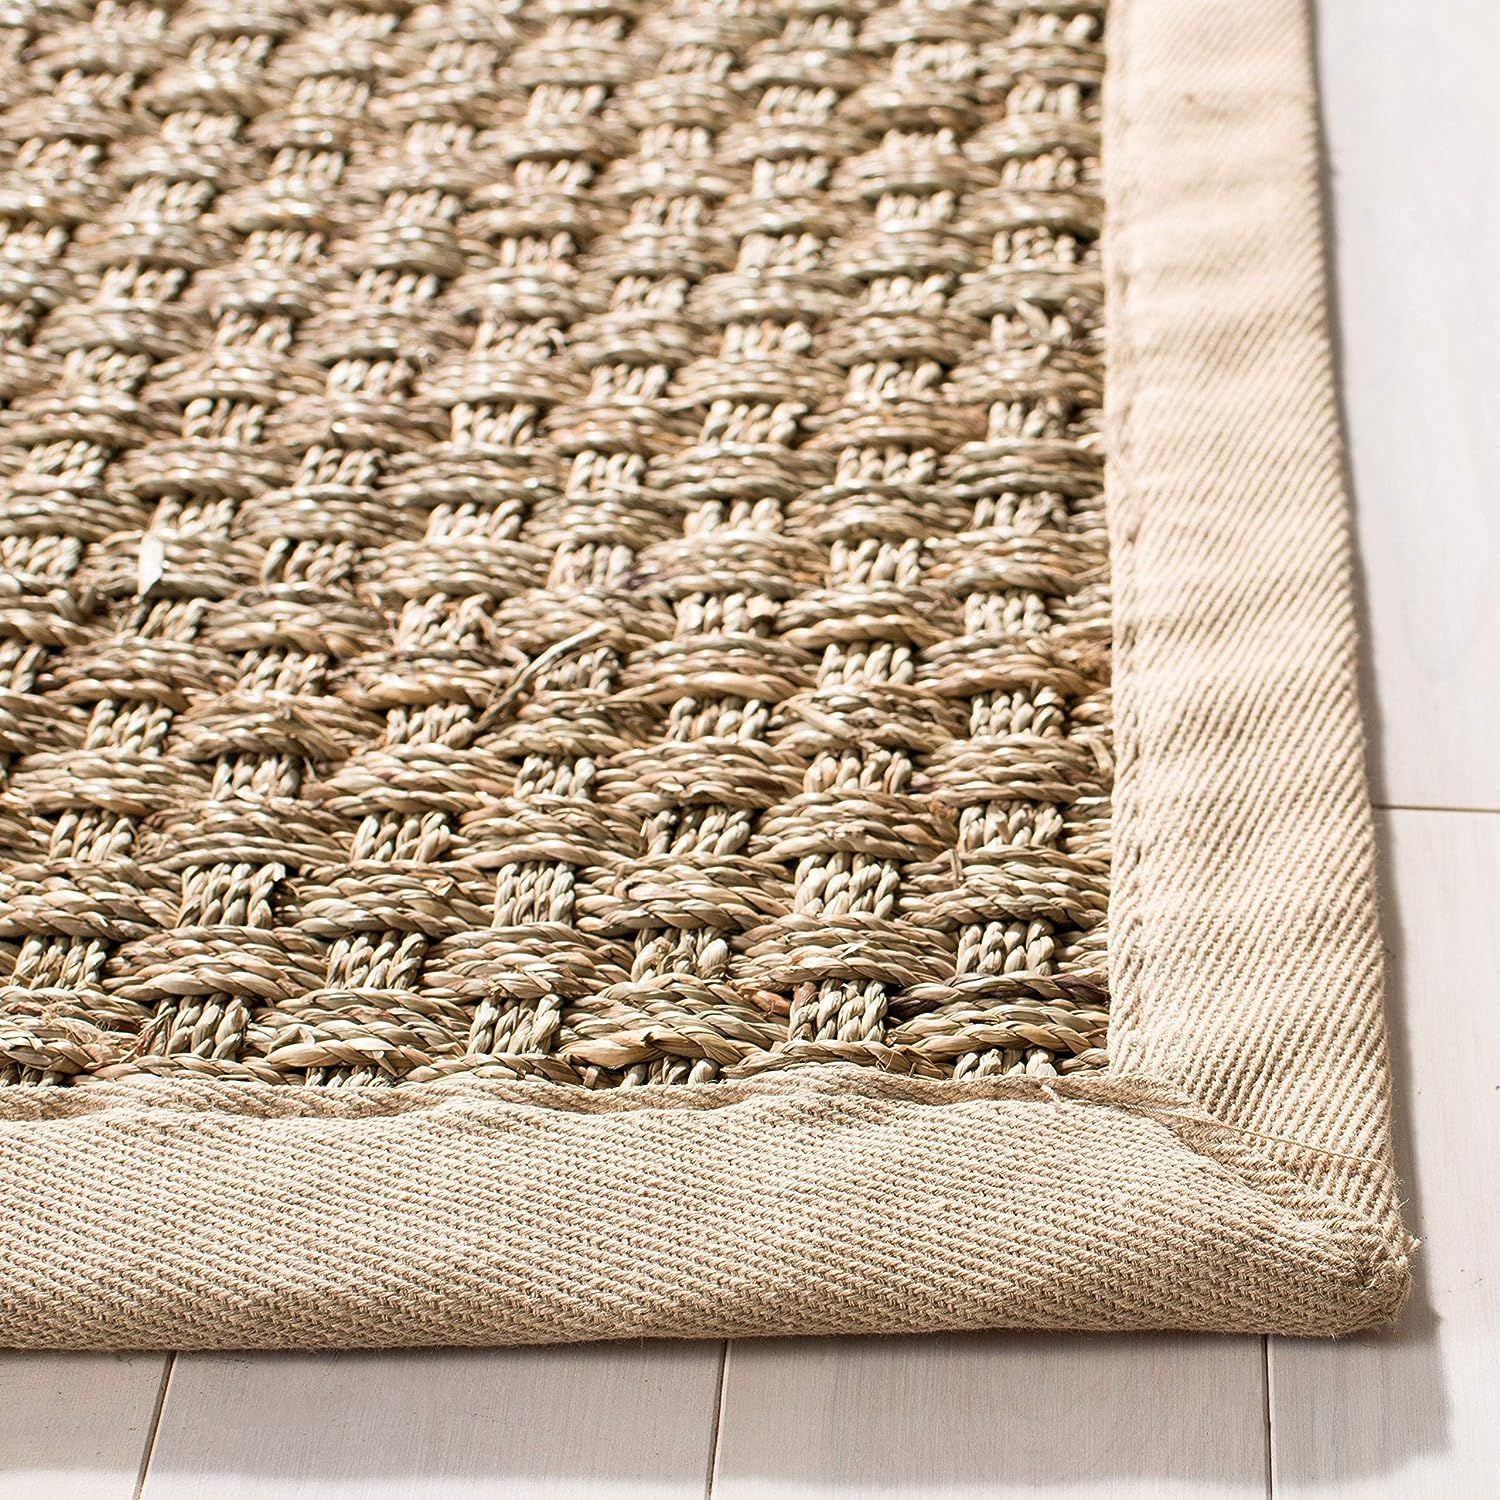 Safavieh Natural Fiber Collection NF114A Border Basketweave Seagrass Area Rug, 9' x 12', Beige | Amazon (US)